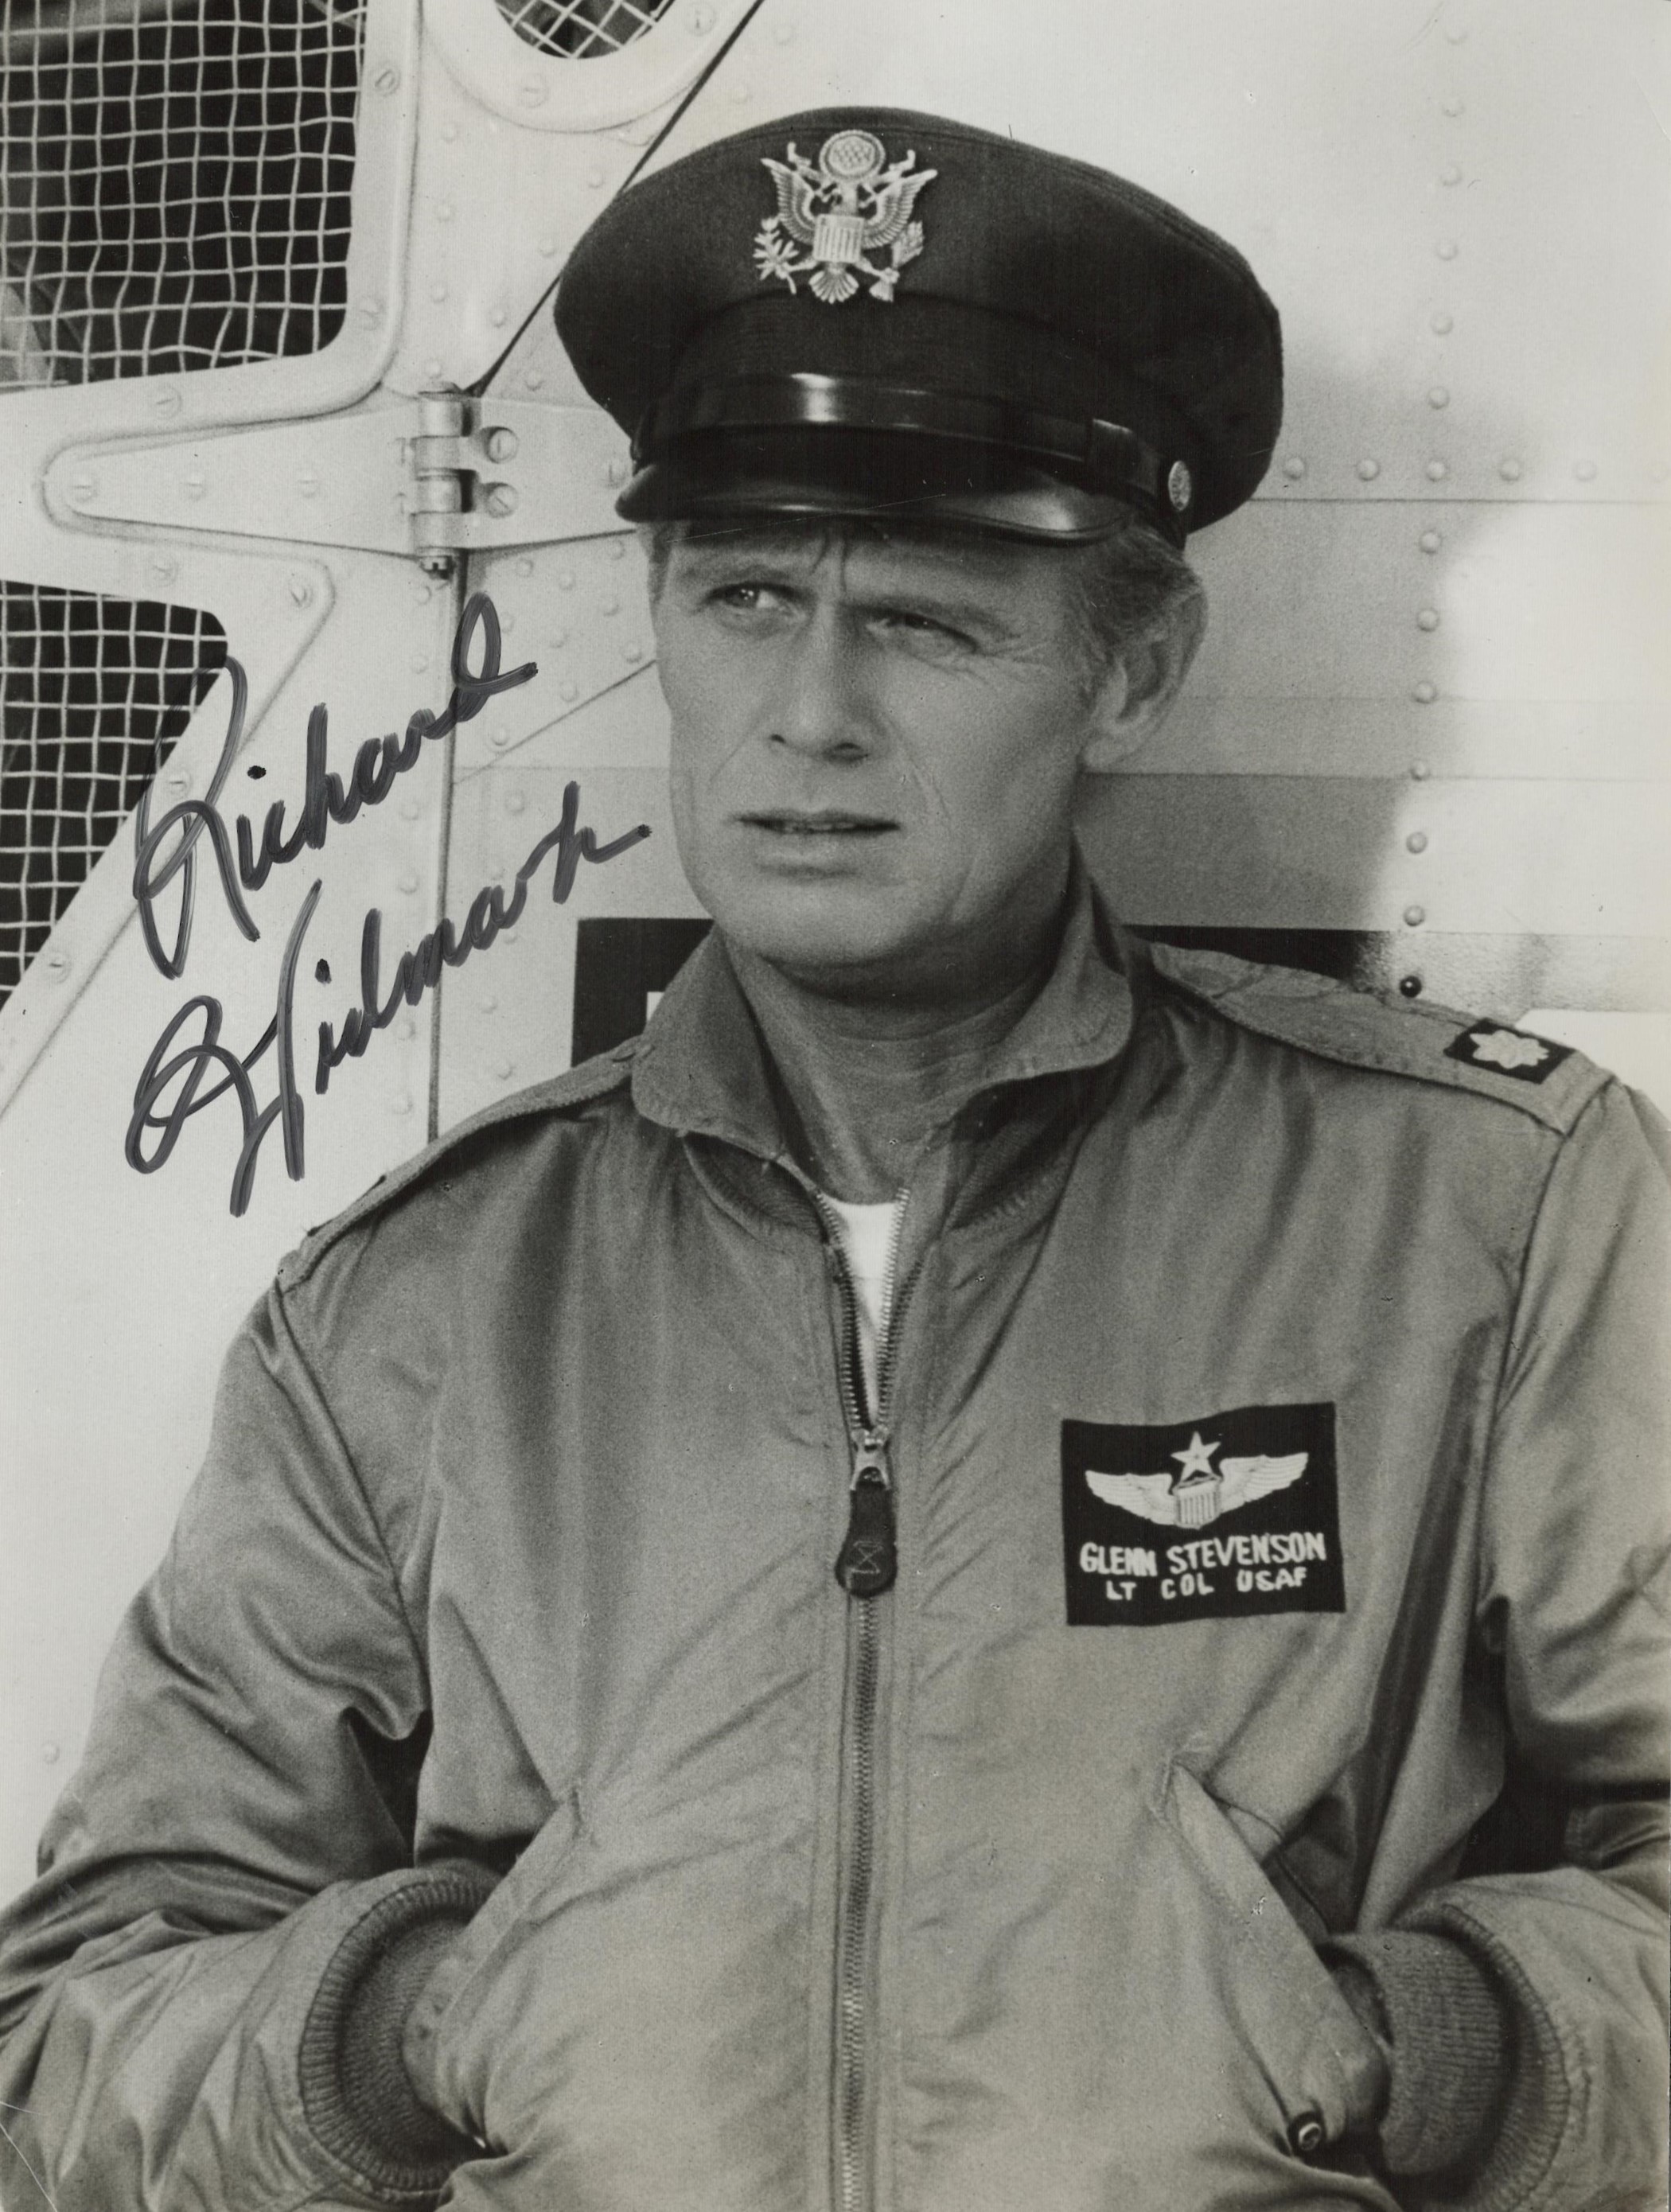 Actor Richard Widmark Signed 10 x 8 inch Black And White Photo. Signed in black ink. Good condition.